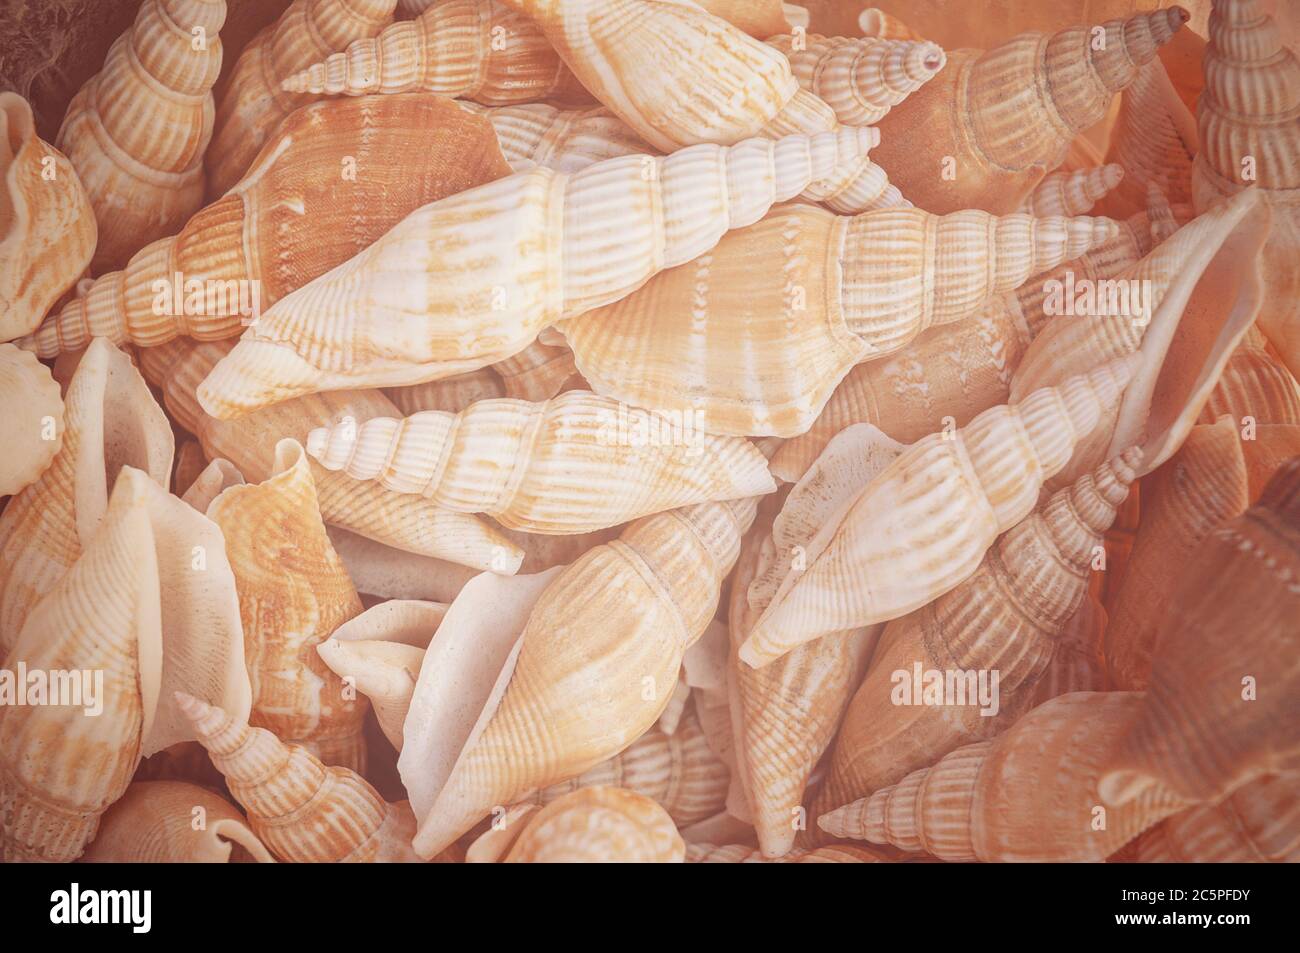 Background from exotic shells. Concept group of sea shells.Sea mollusks close-up. Seashells background. Top view close up of mollusk.Texture of shells Stock Photo